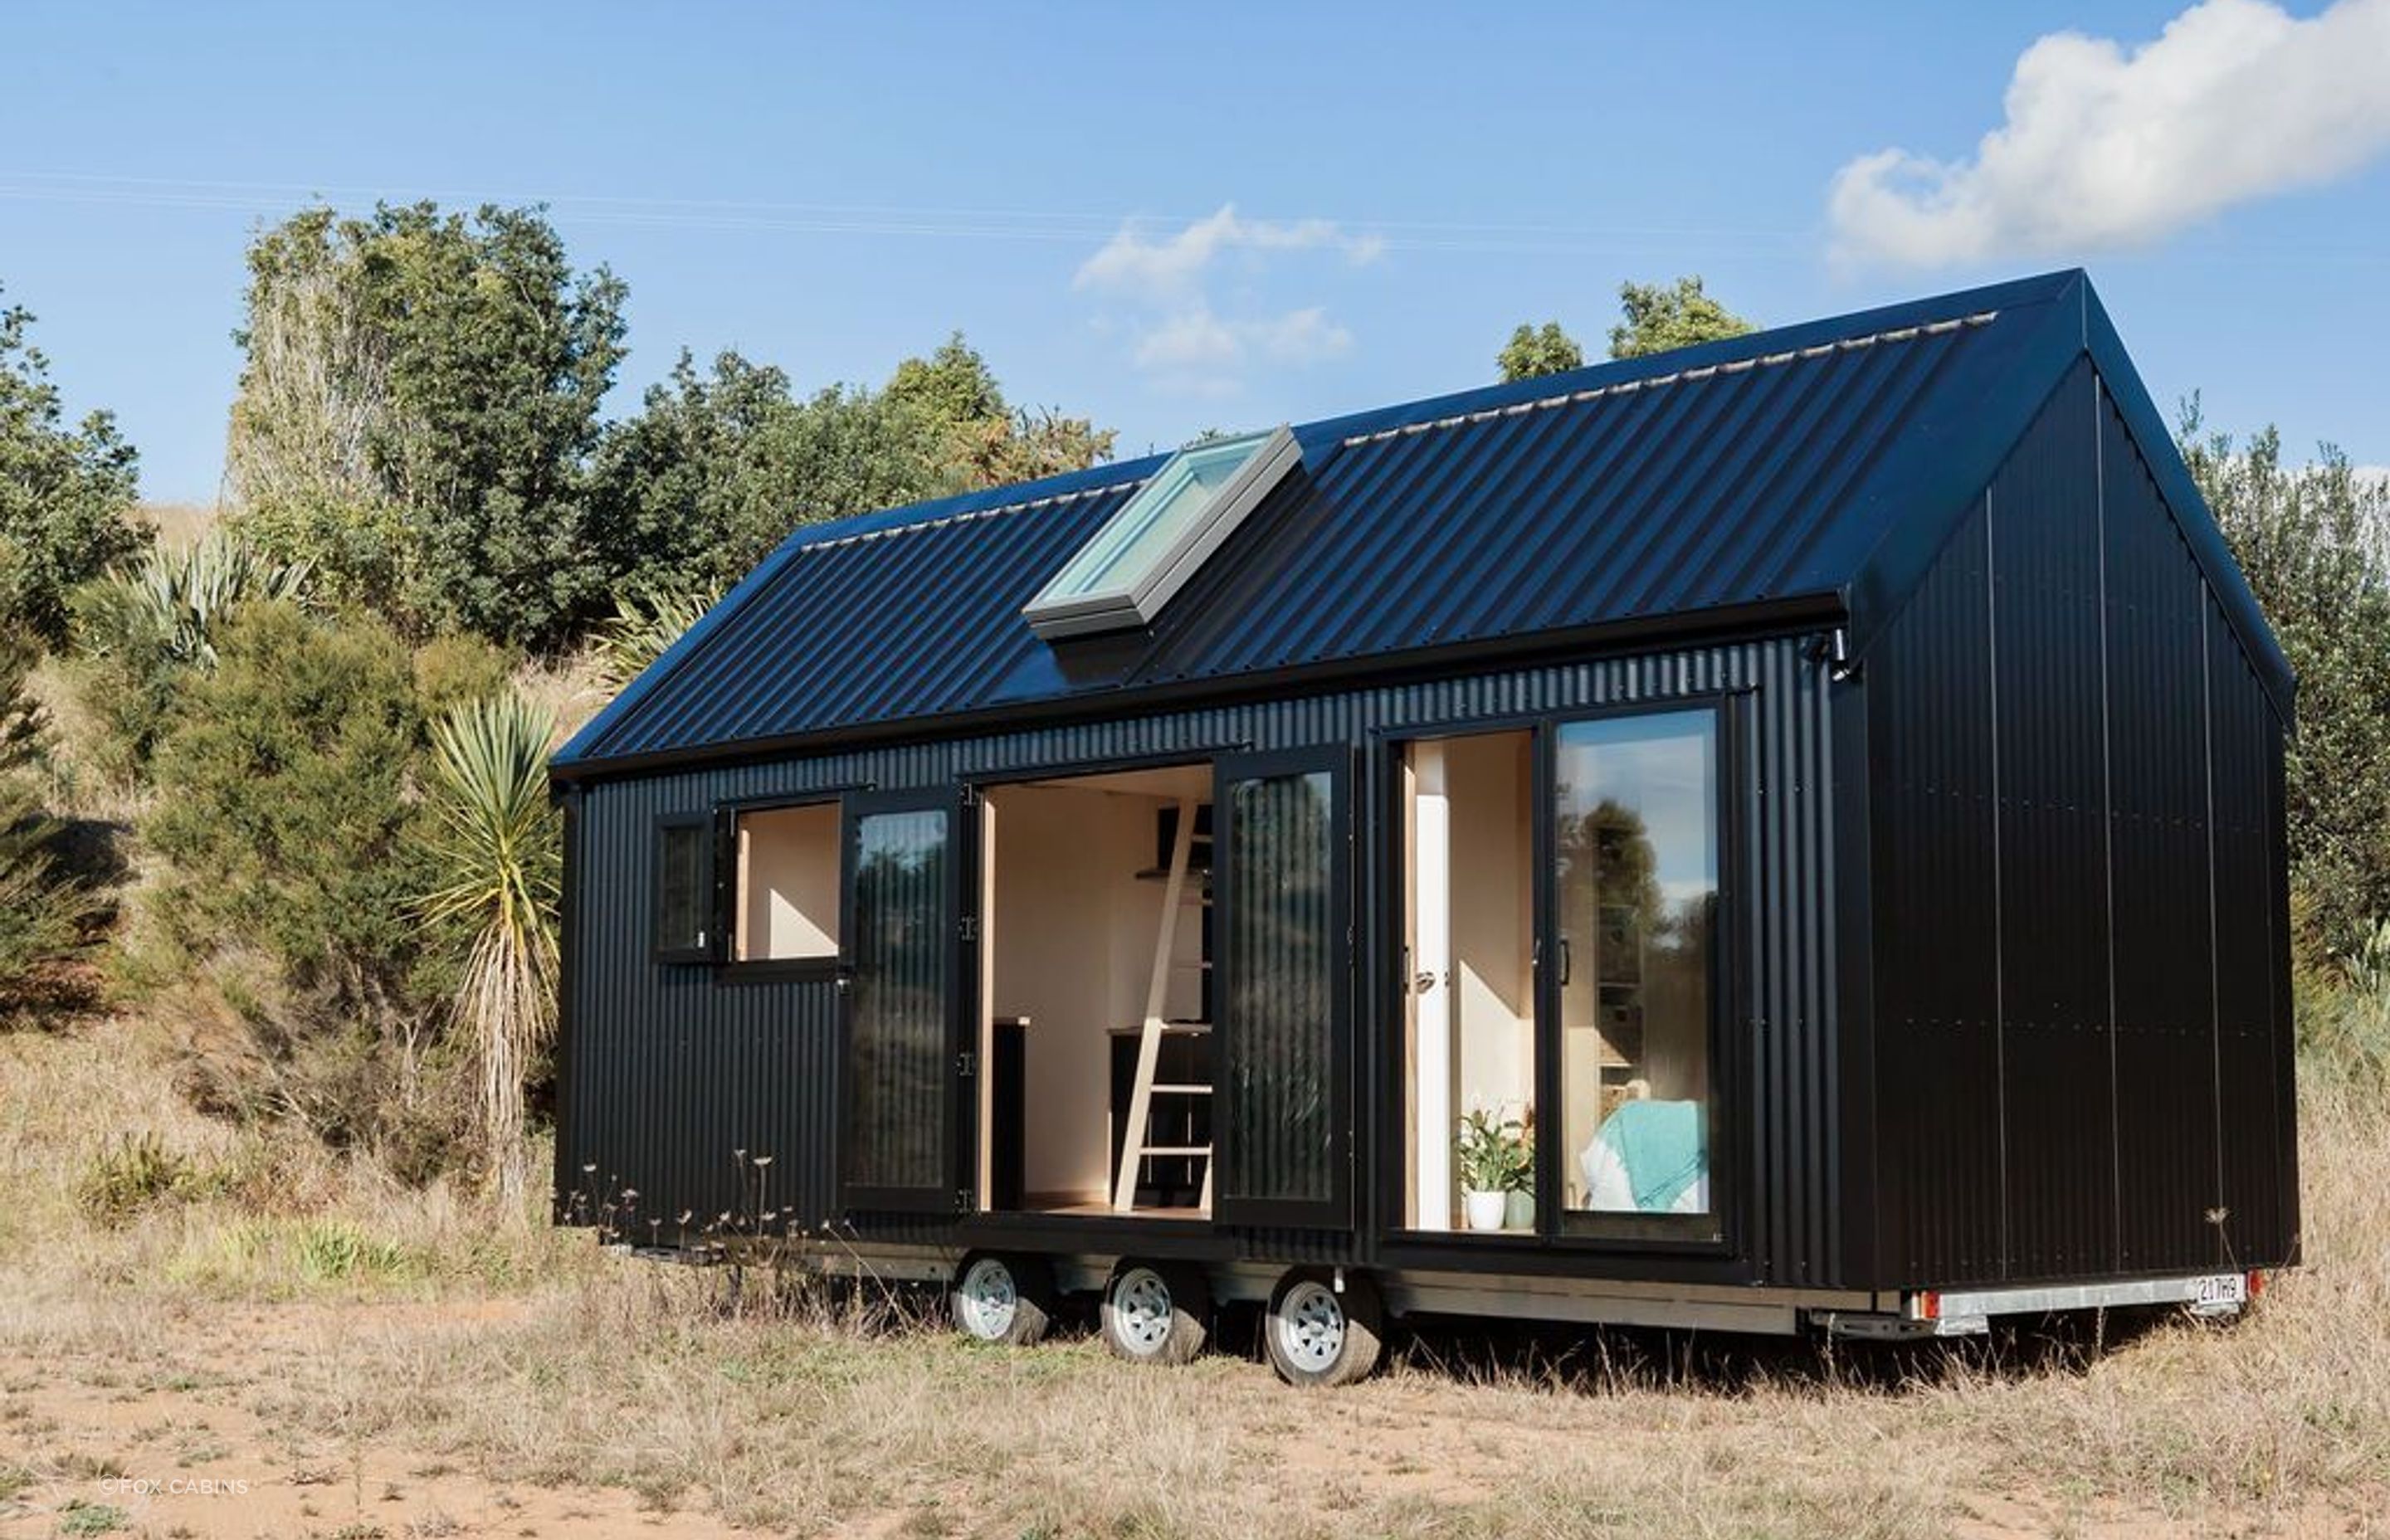 The flexibility that a tiny home on wheels affords is a big appeal for many, splendidly executed here with the Everest Tiny House by Fox Cabins - Photography: Alicia Khoo